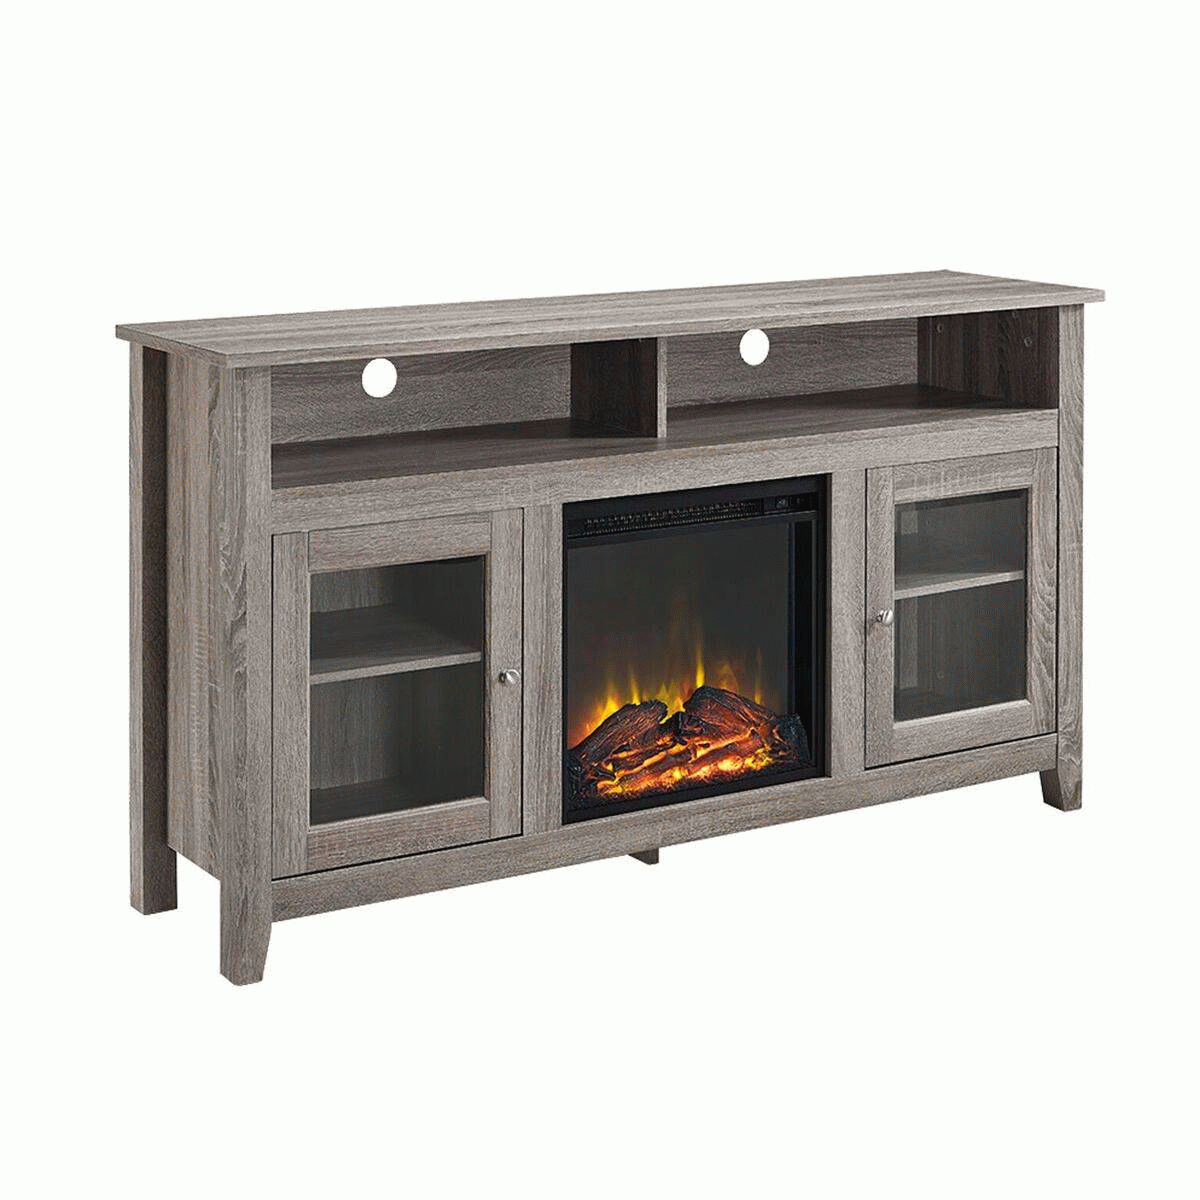 58" Wood Highboy Fireplace Tv Stand – Driftwood – Walker Edison W58Fp18Hbag Pertaining To Wood Highboy Fireplace Tv Stands (Photo 4 of 15)